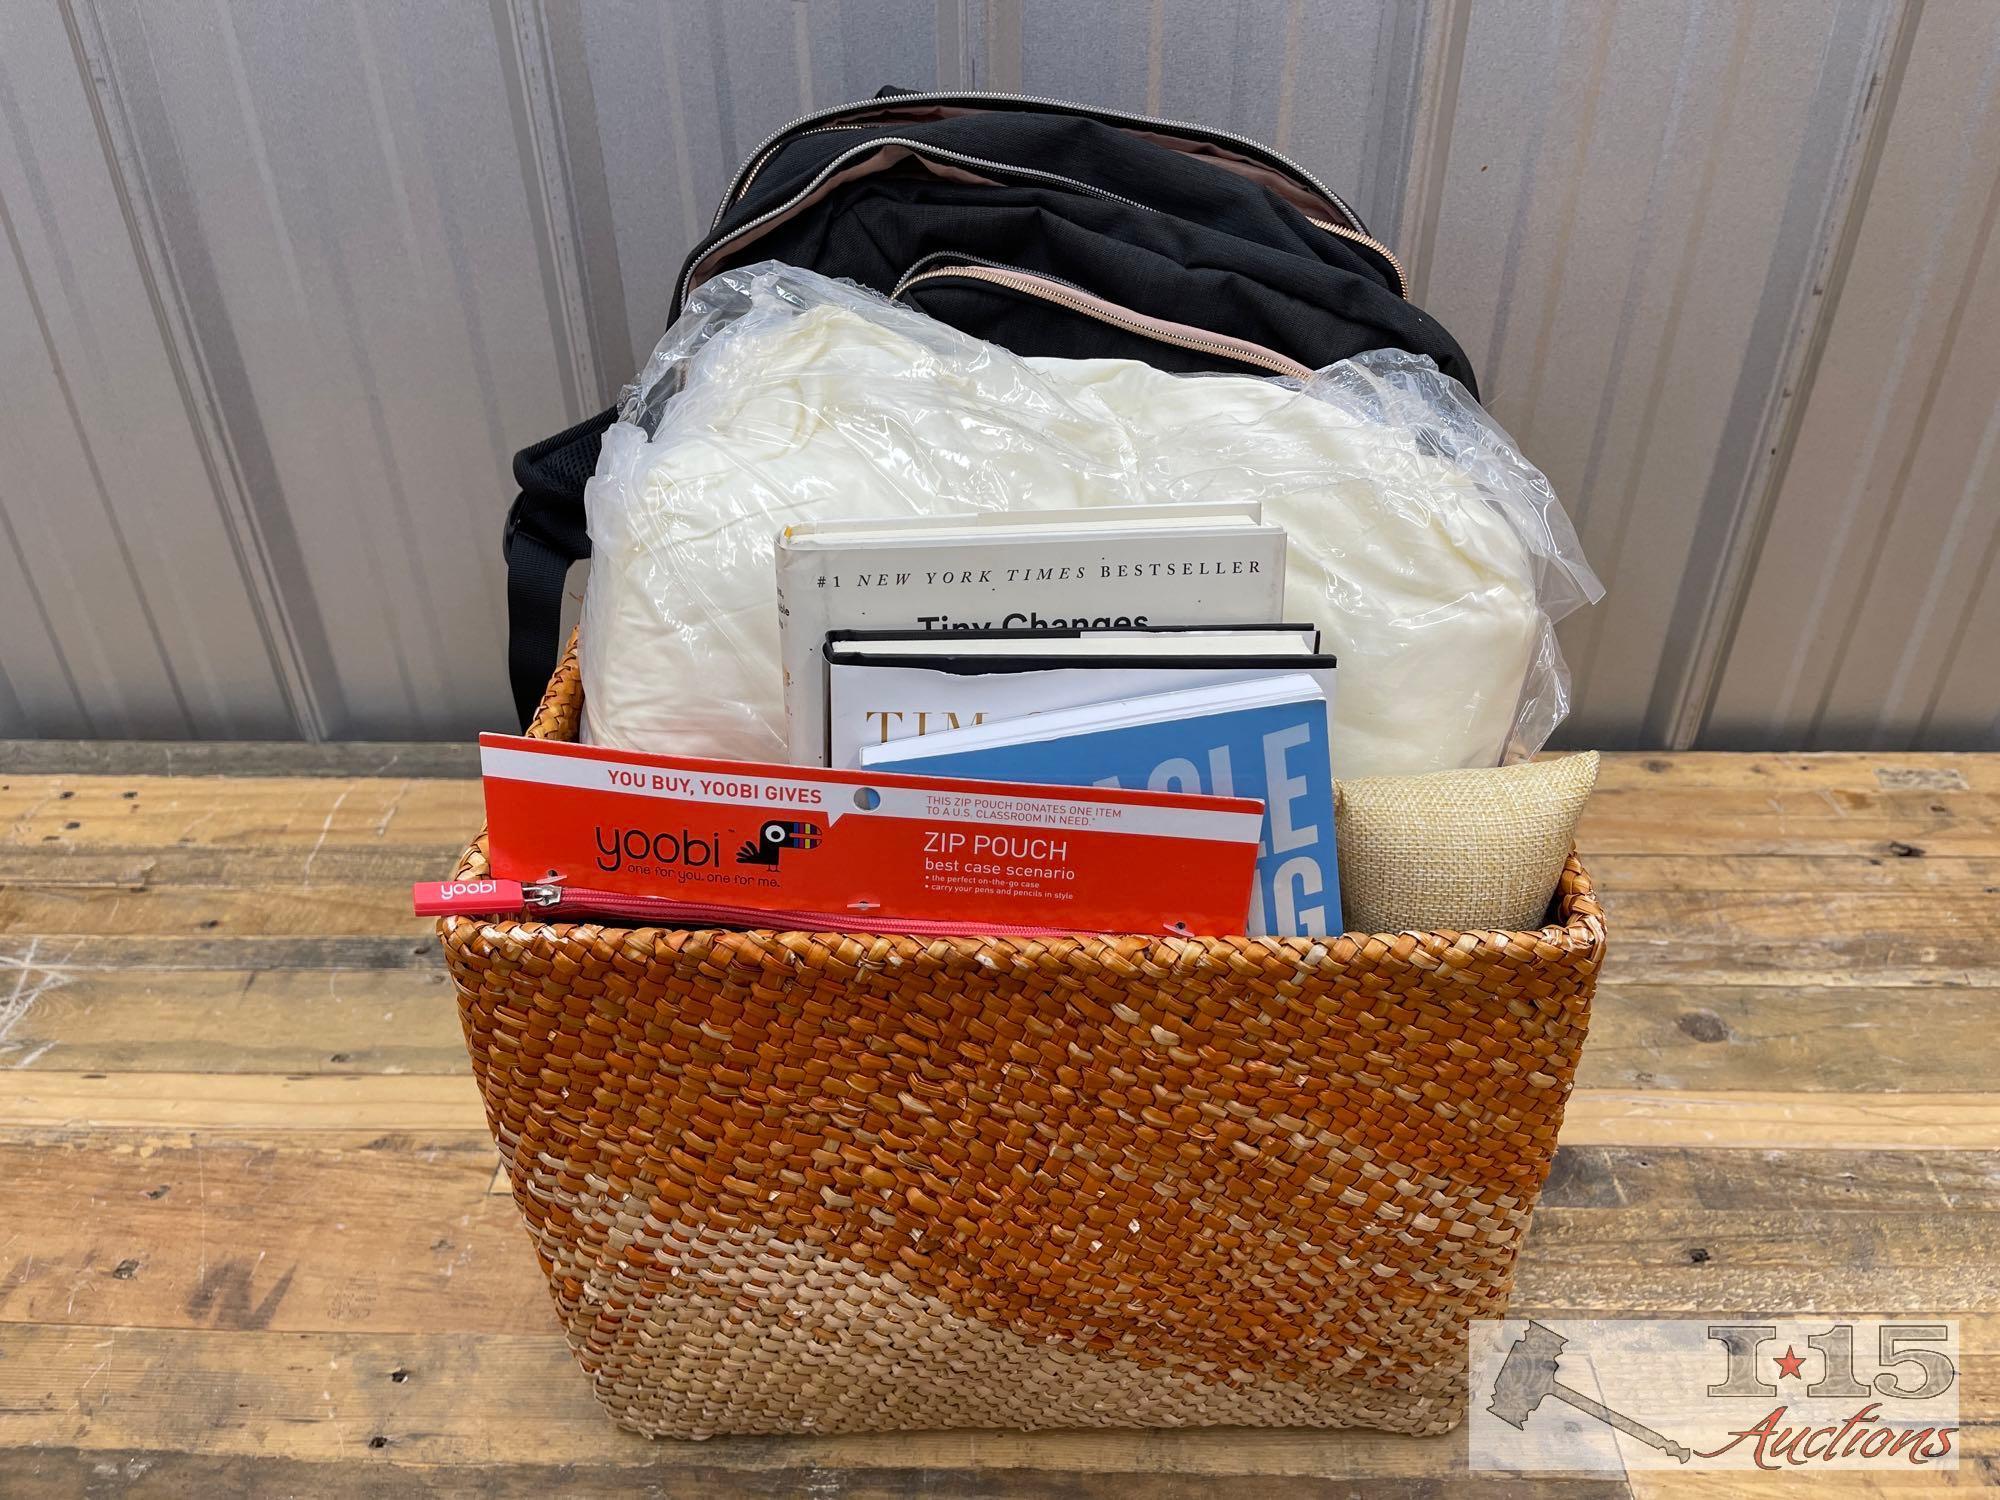 Mattress Cover, Backpack, Books, Basket & More